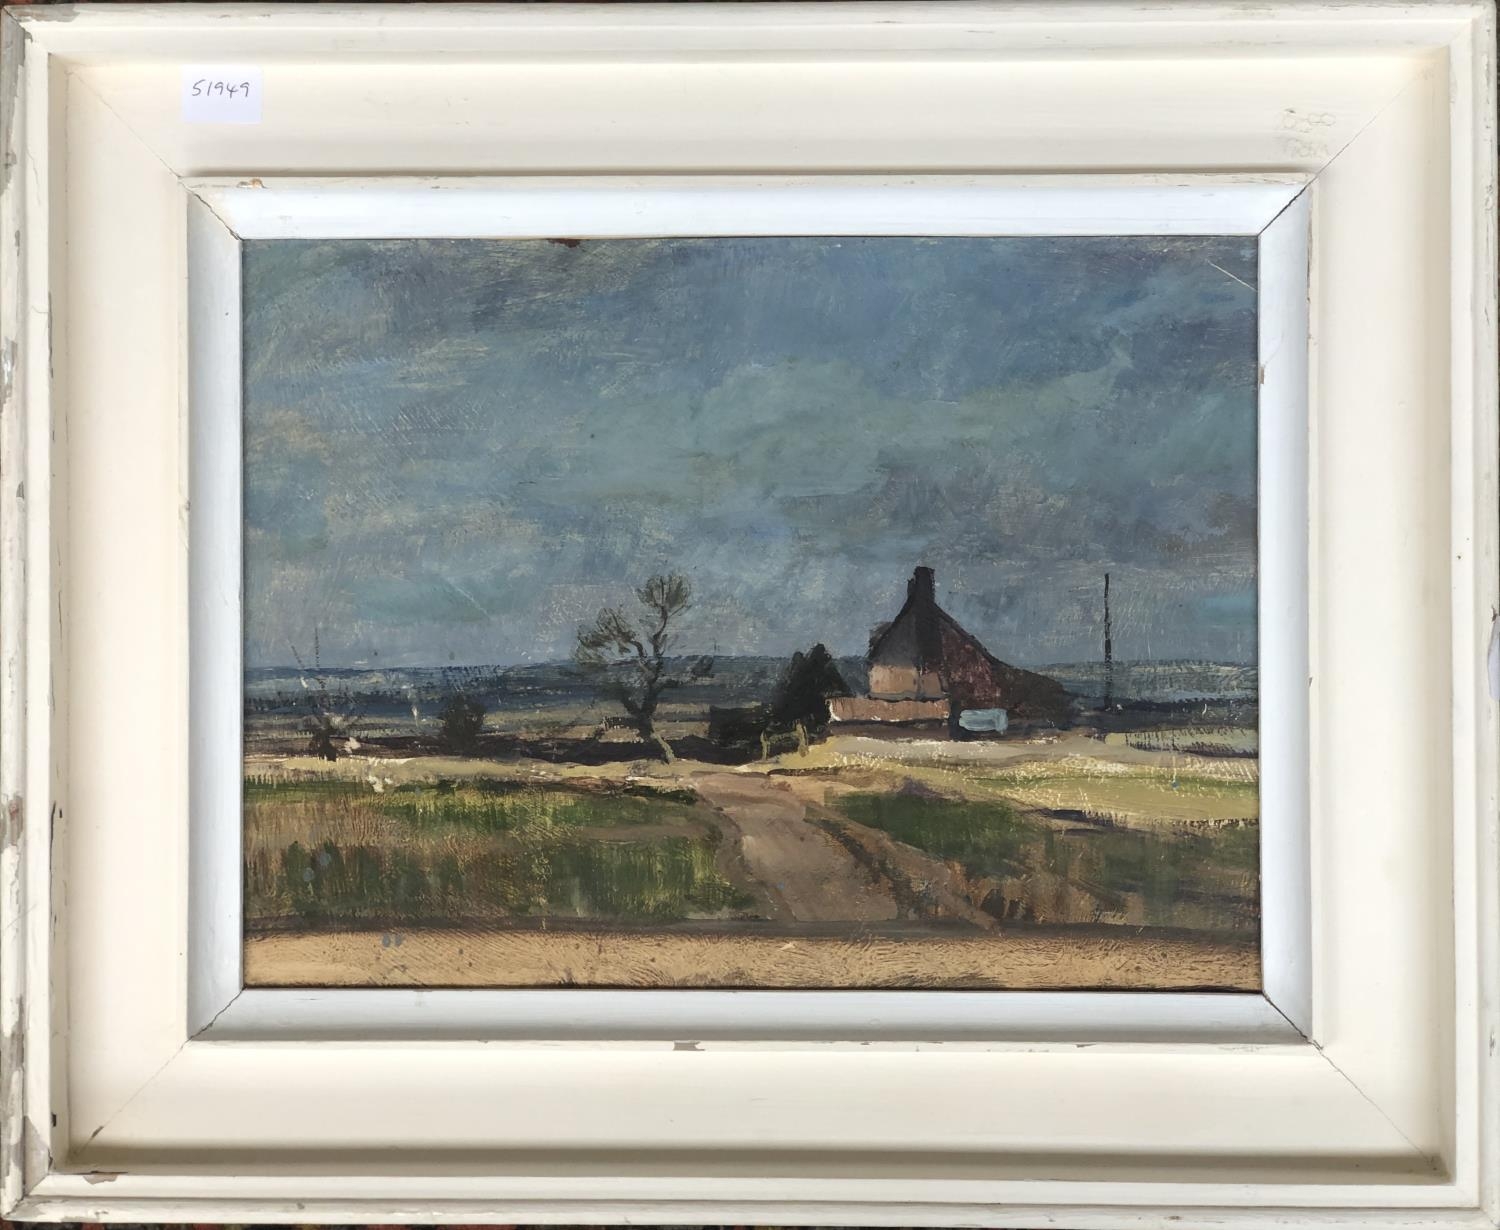 20th century oil on paper, isolated house in a rural landscape, 29x40cm